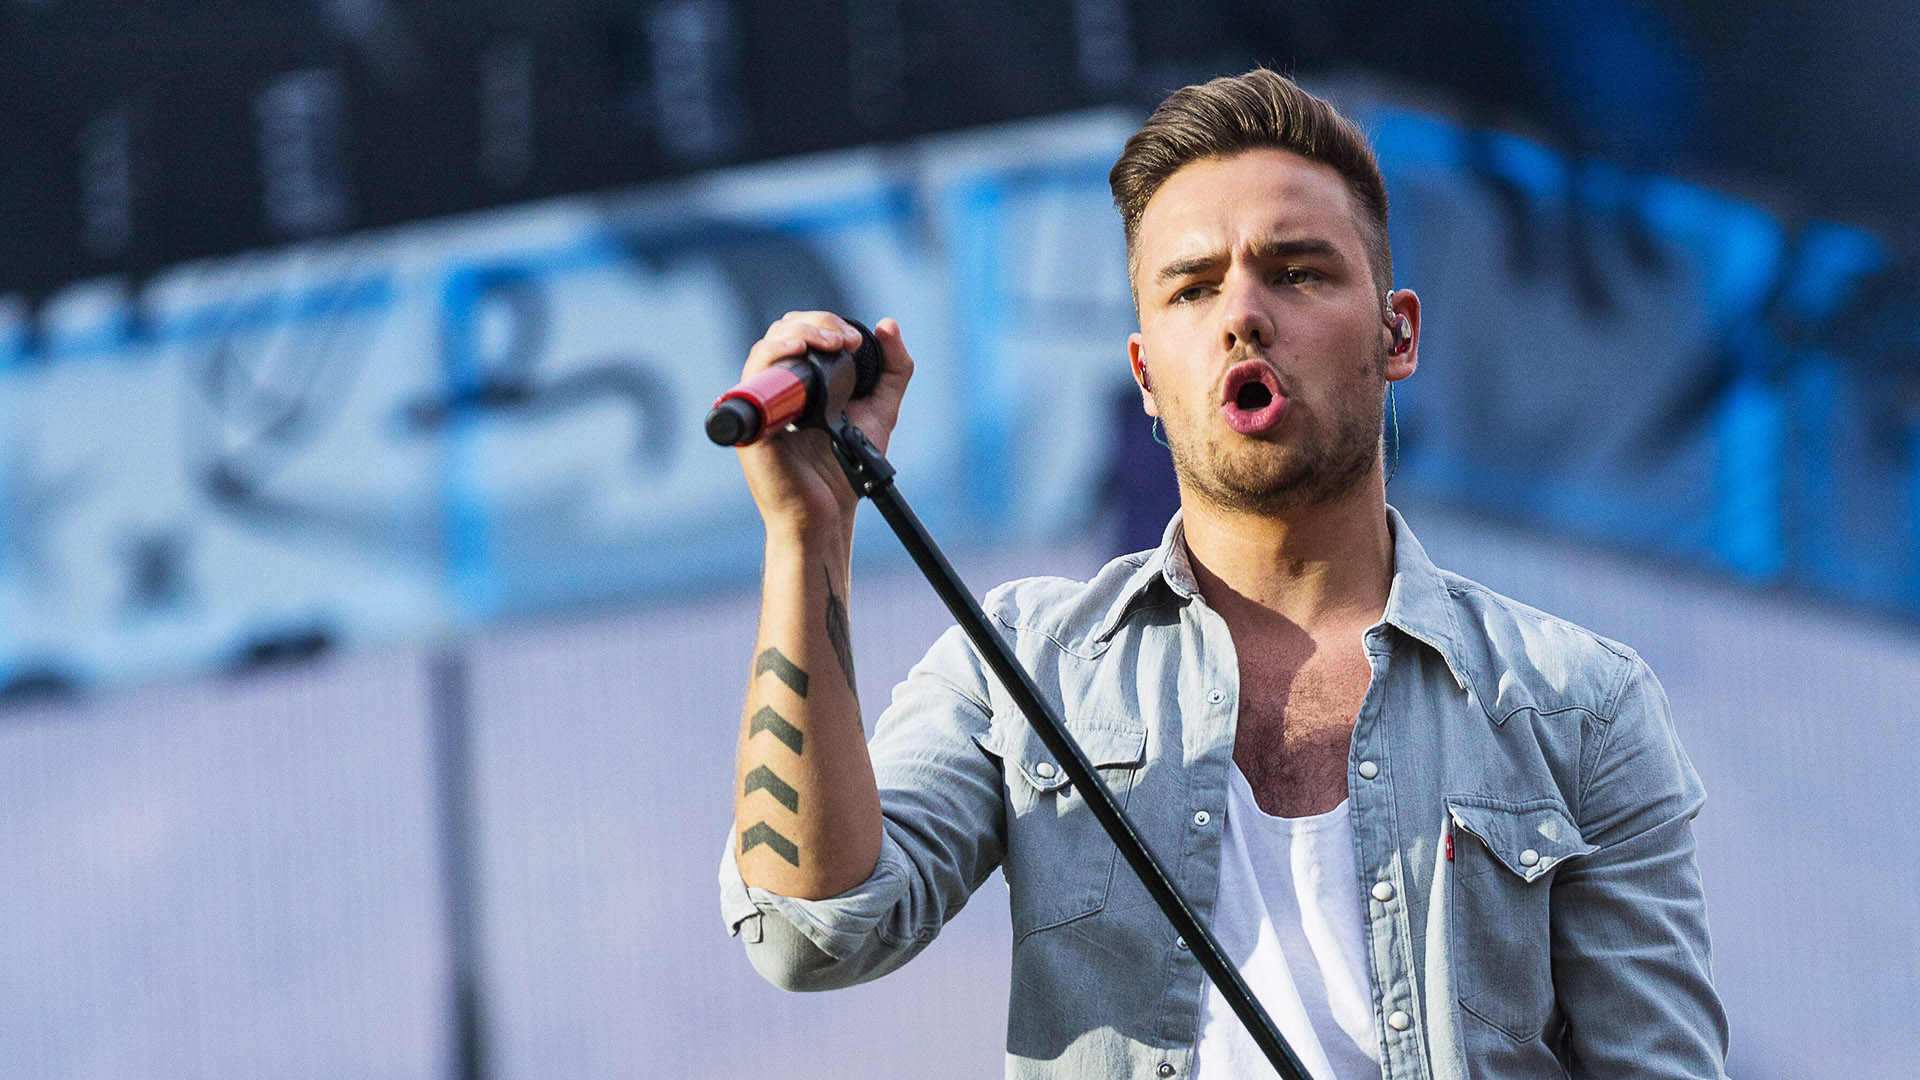 Liam Payne Trades Mic for Film: Insider Scoop on His New Gig